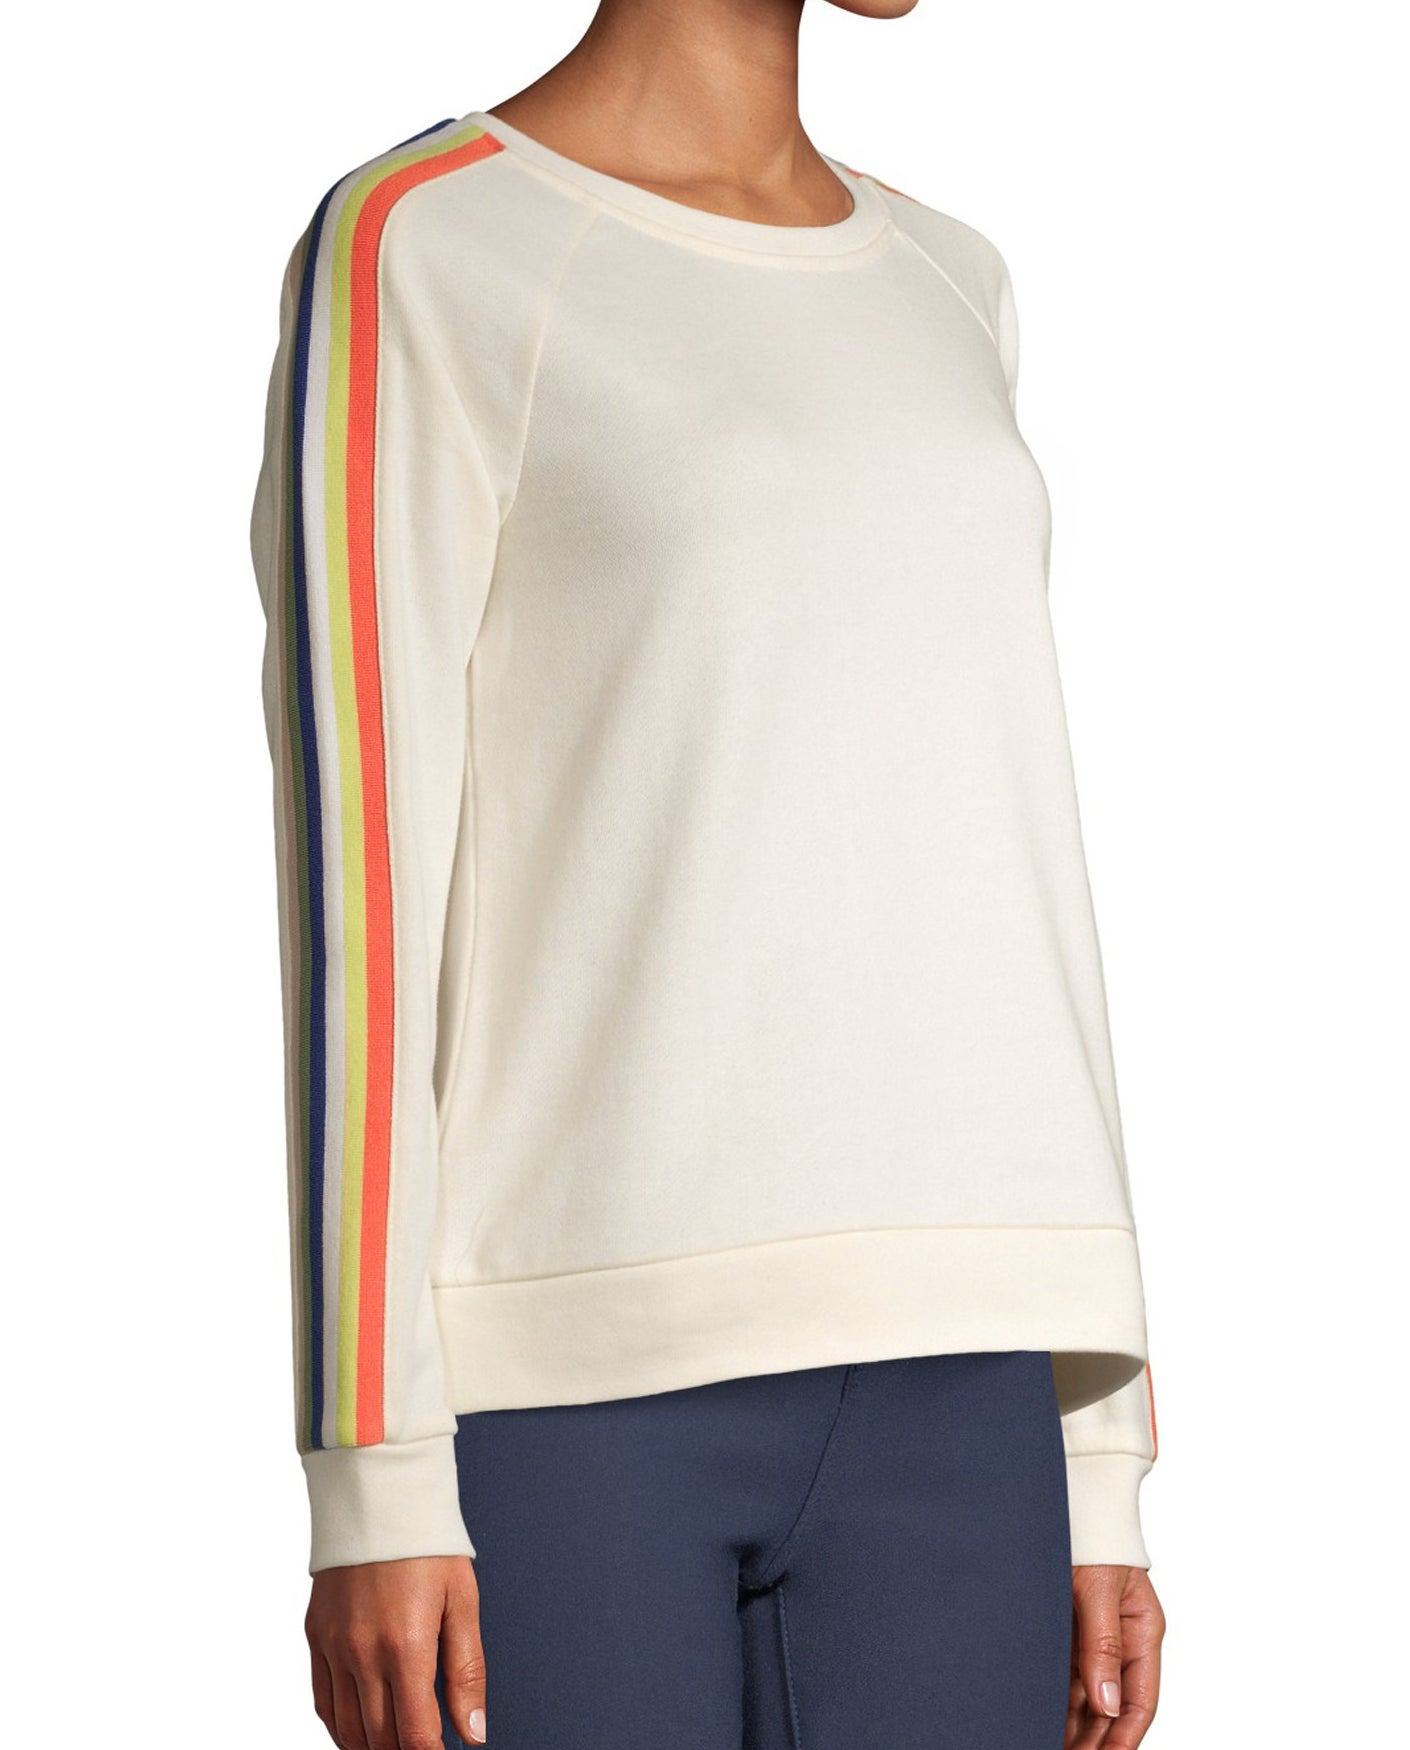 The cream sweatshirt with colorful stripes down the arm 